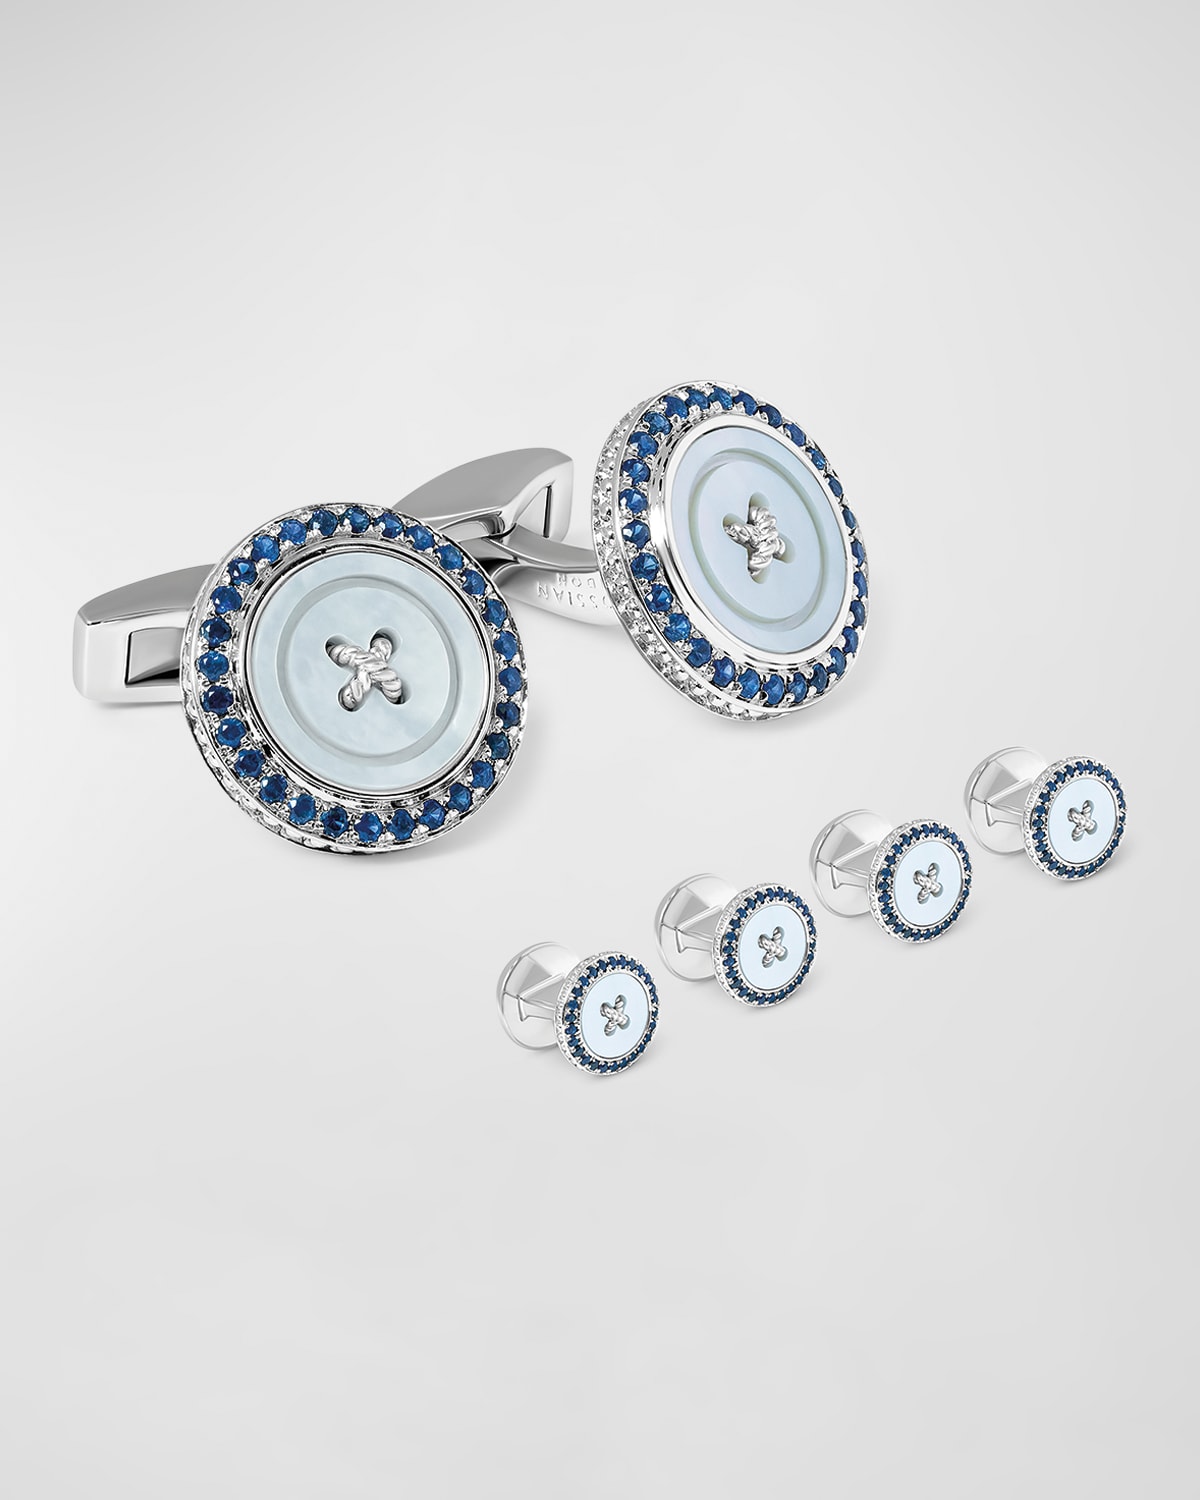 Men's Mother-of-Pearl and Sapphire Button Cuff Links Stud Set